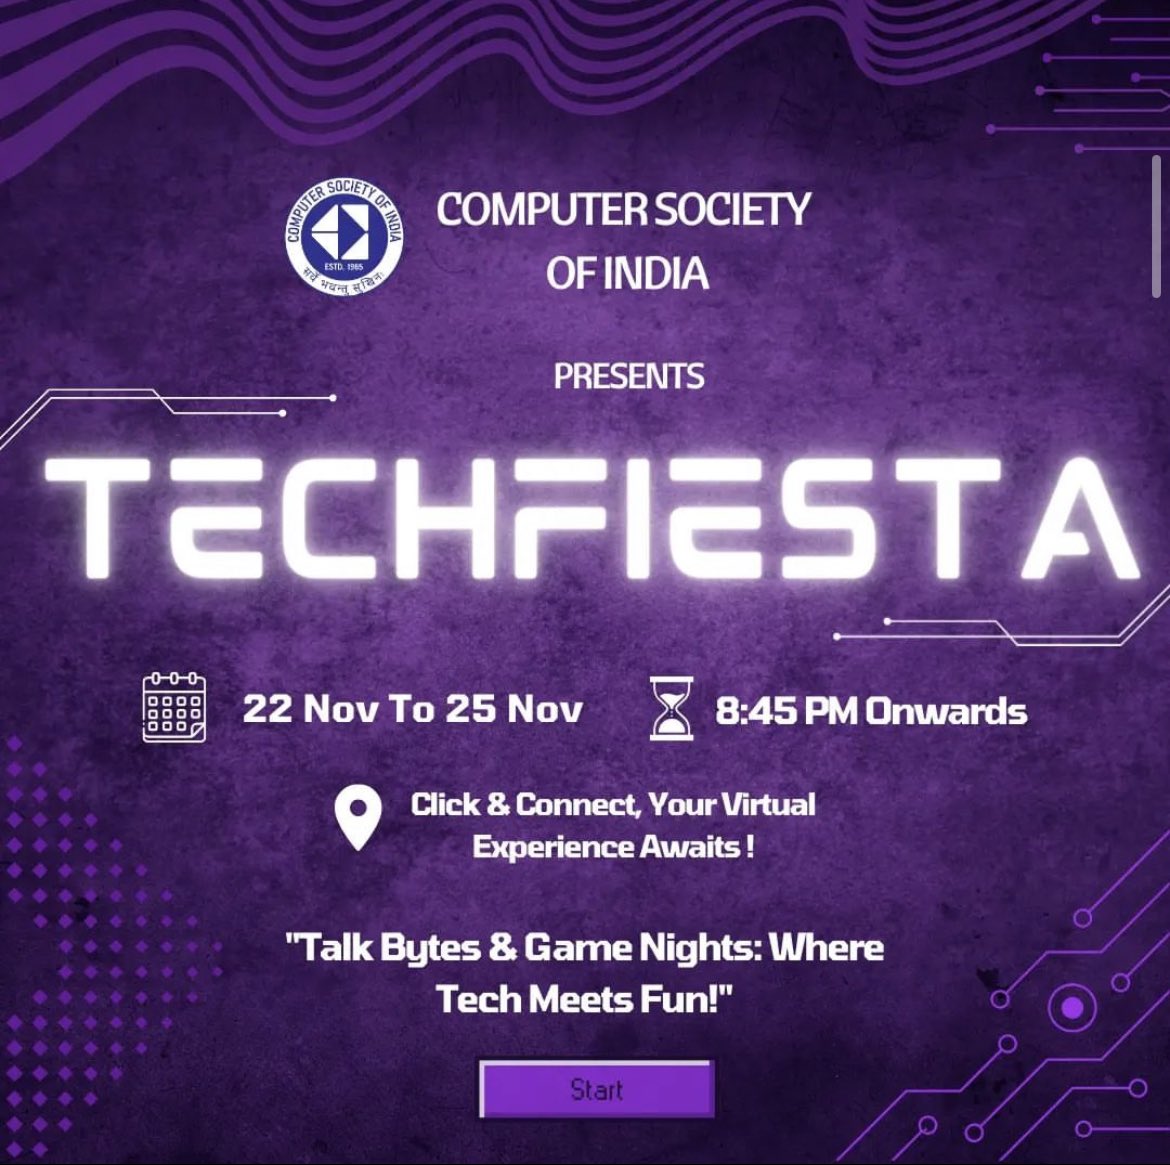 Computer Society of India brings you the ultimate virtual extravaganza TechFiesta! From 22-25th November.
Mark your calendars because you won't want to miss a moment! 🗓️🔥